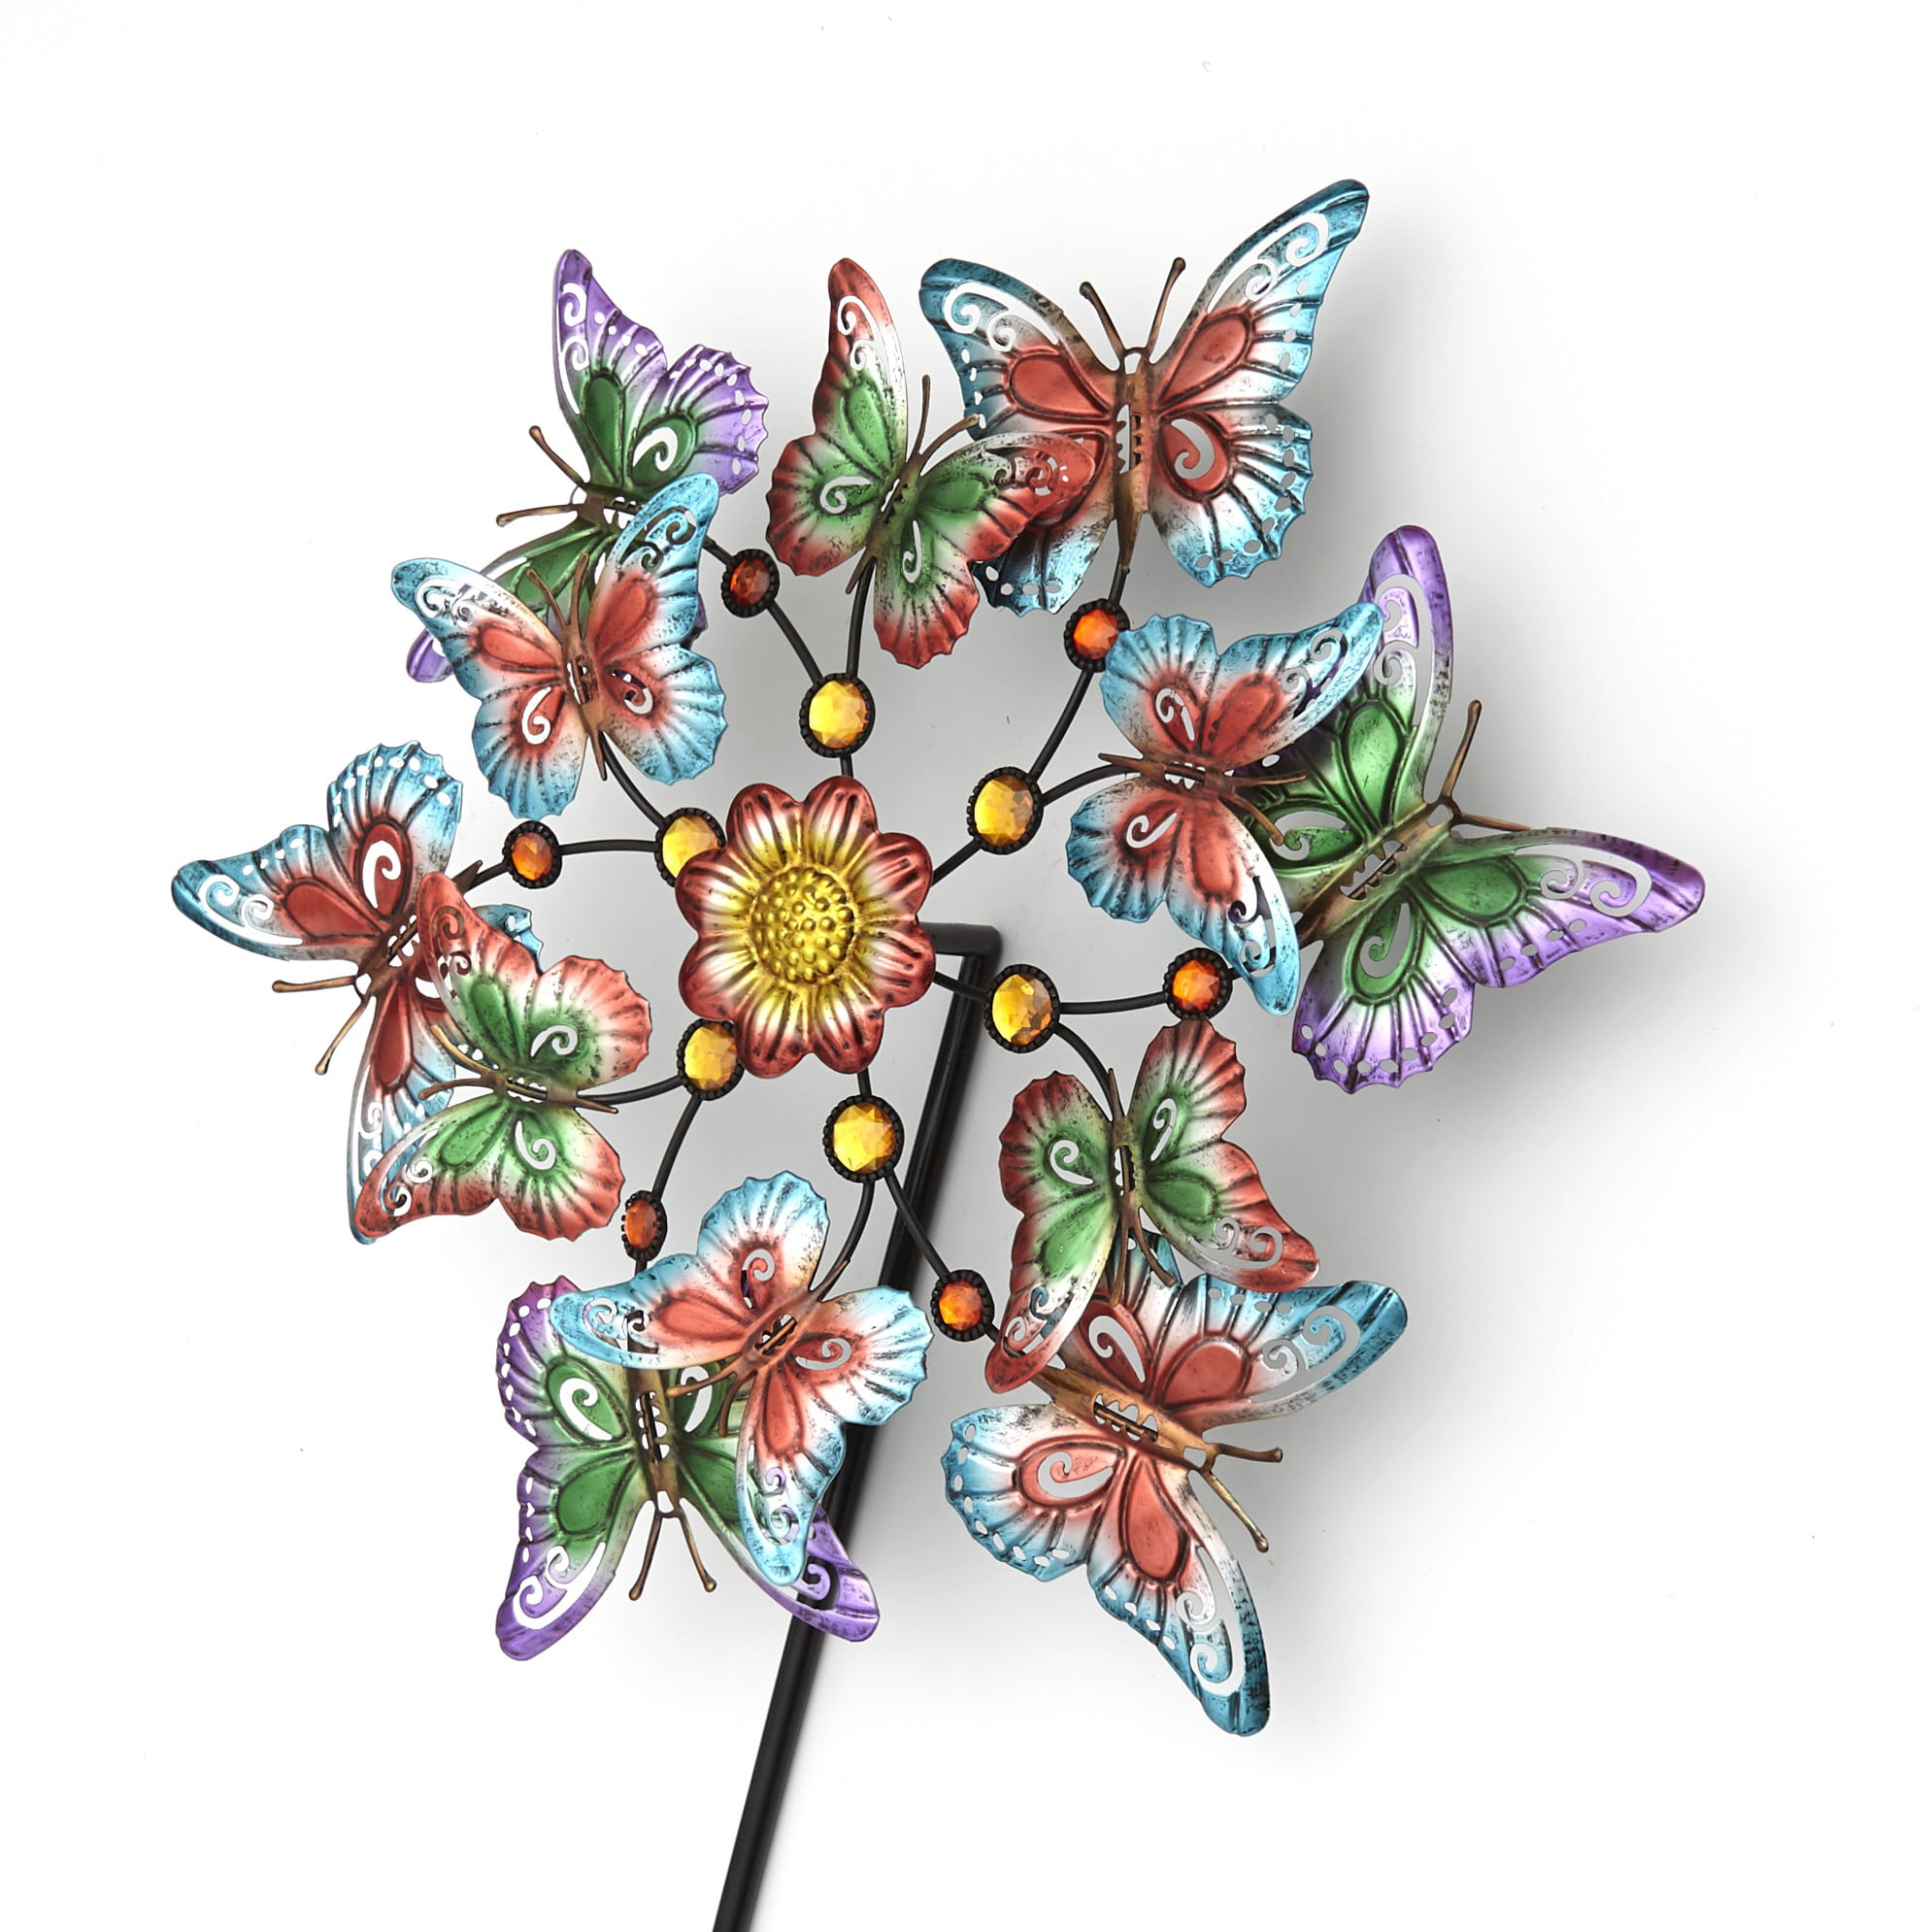 fdsad Wind Spinners Butterfly Outdoor Windmill Stake Metal Wind Powered Kinetic Sculptures Garden Wind Spinners With Stable Stake Metal For Outdoor Yard Lawn Garden Flower Decorations Ornament